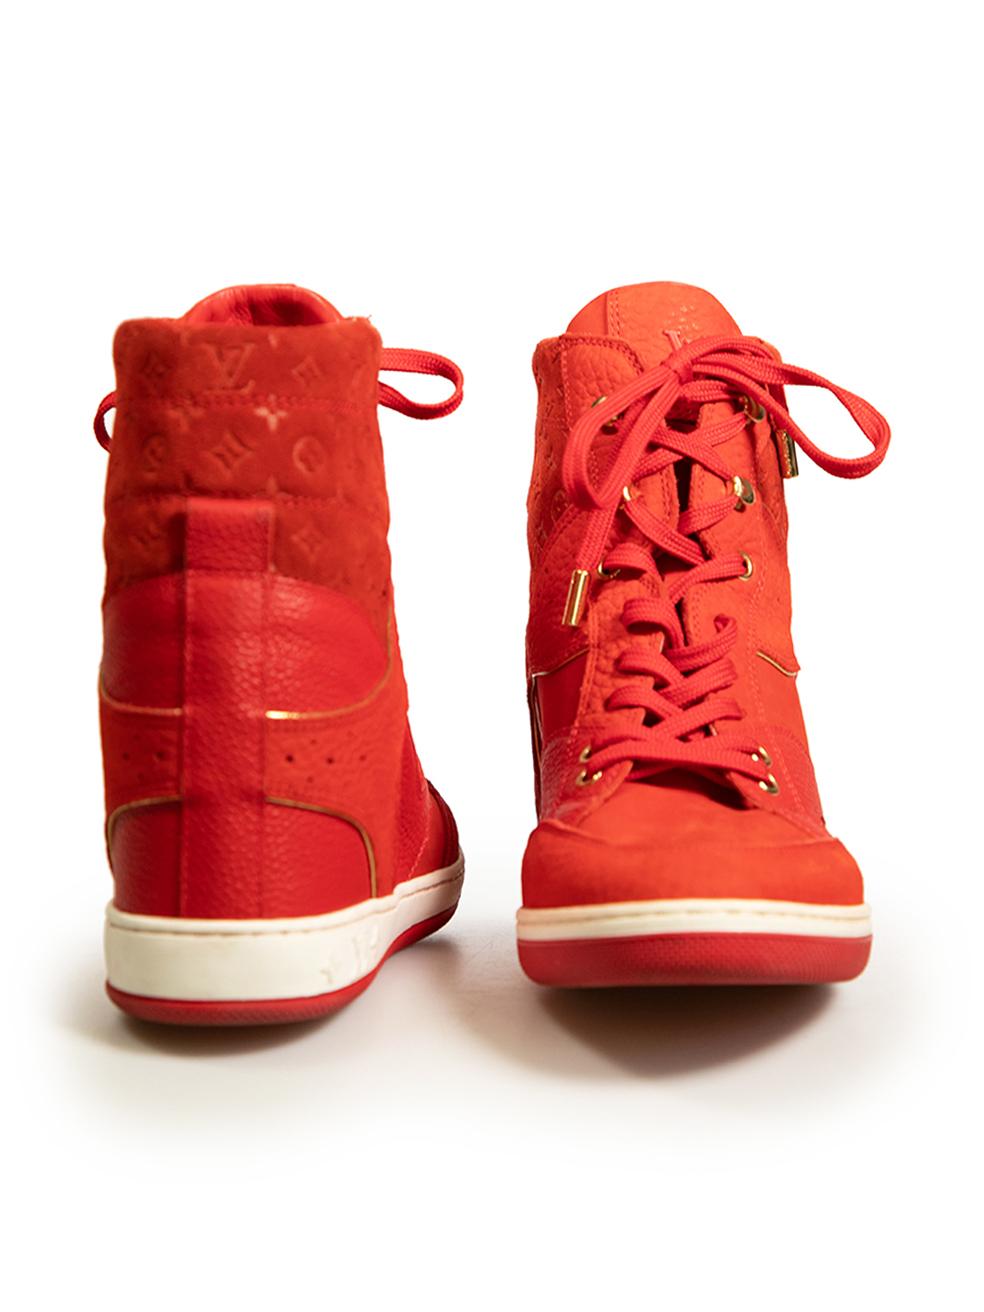 Louis Vuitton Red Leather High-Top Wedge Trainers Size IT 38 In Good Condition For Sale In London, GB